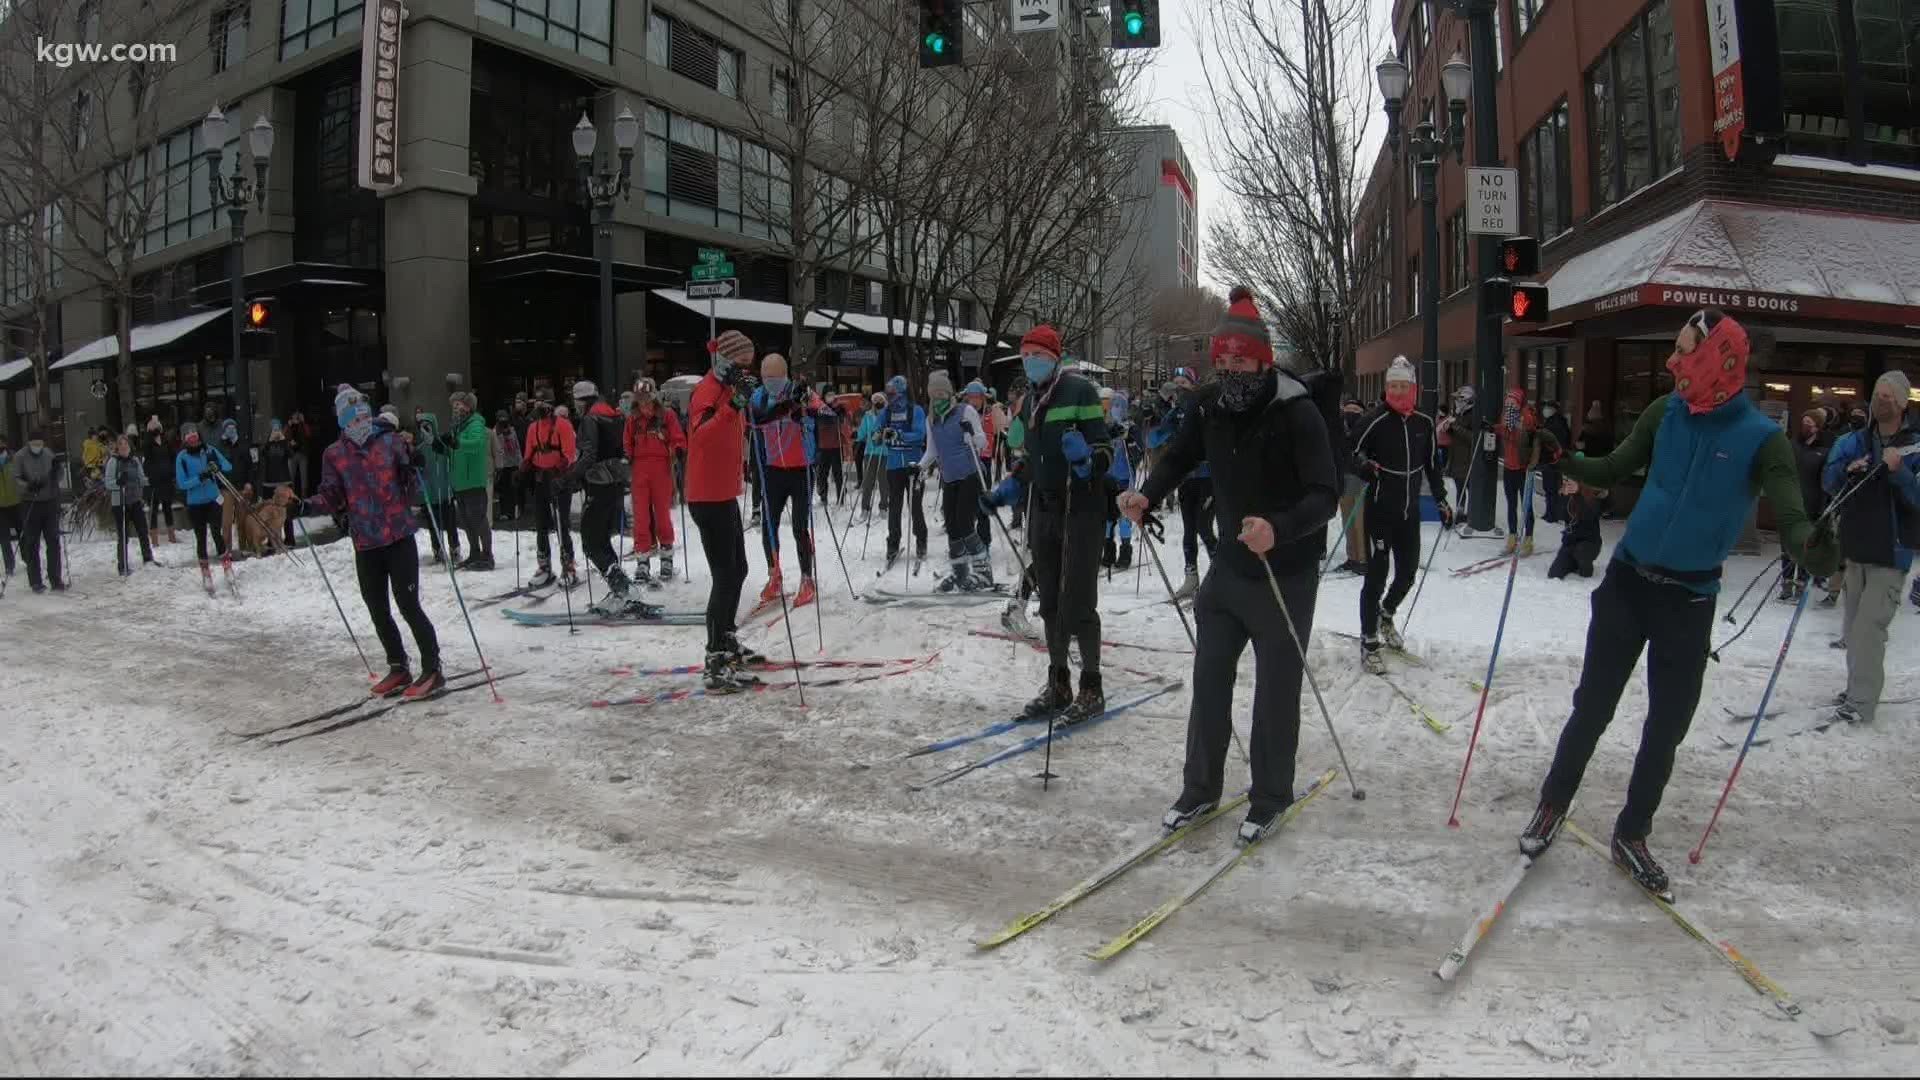 On Saturday, Feb. 13, the streets of Northwest Portland became the site for an impromptu ski race: the Stumptown Birkbeiner.